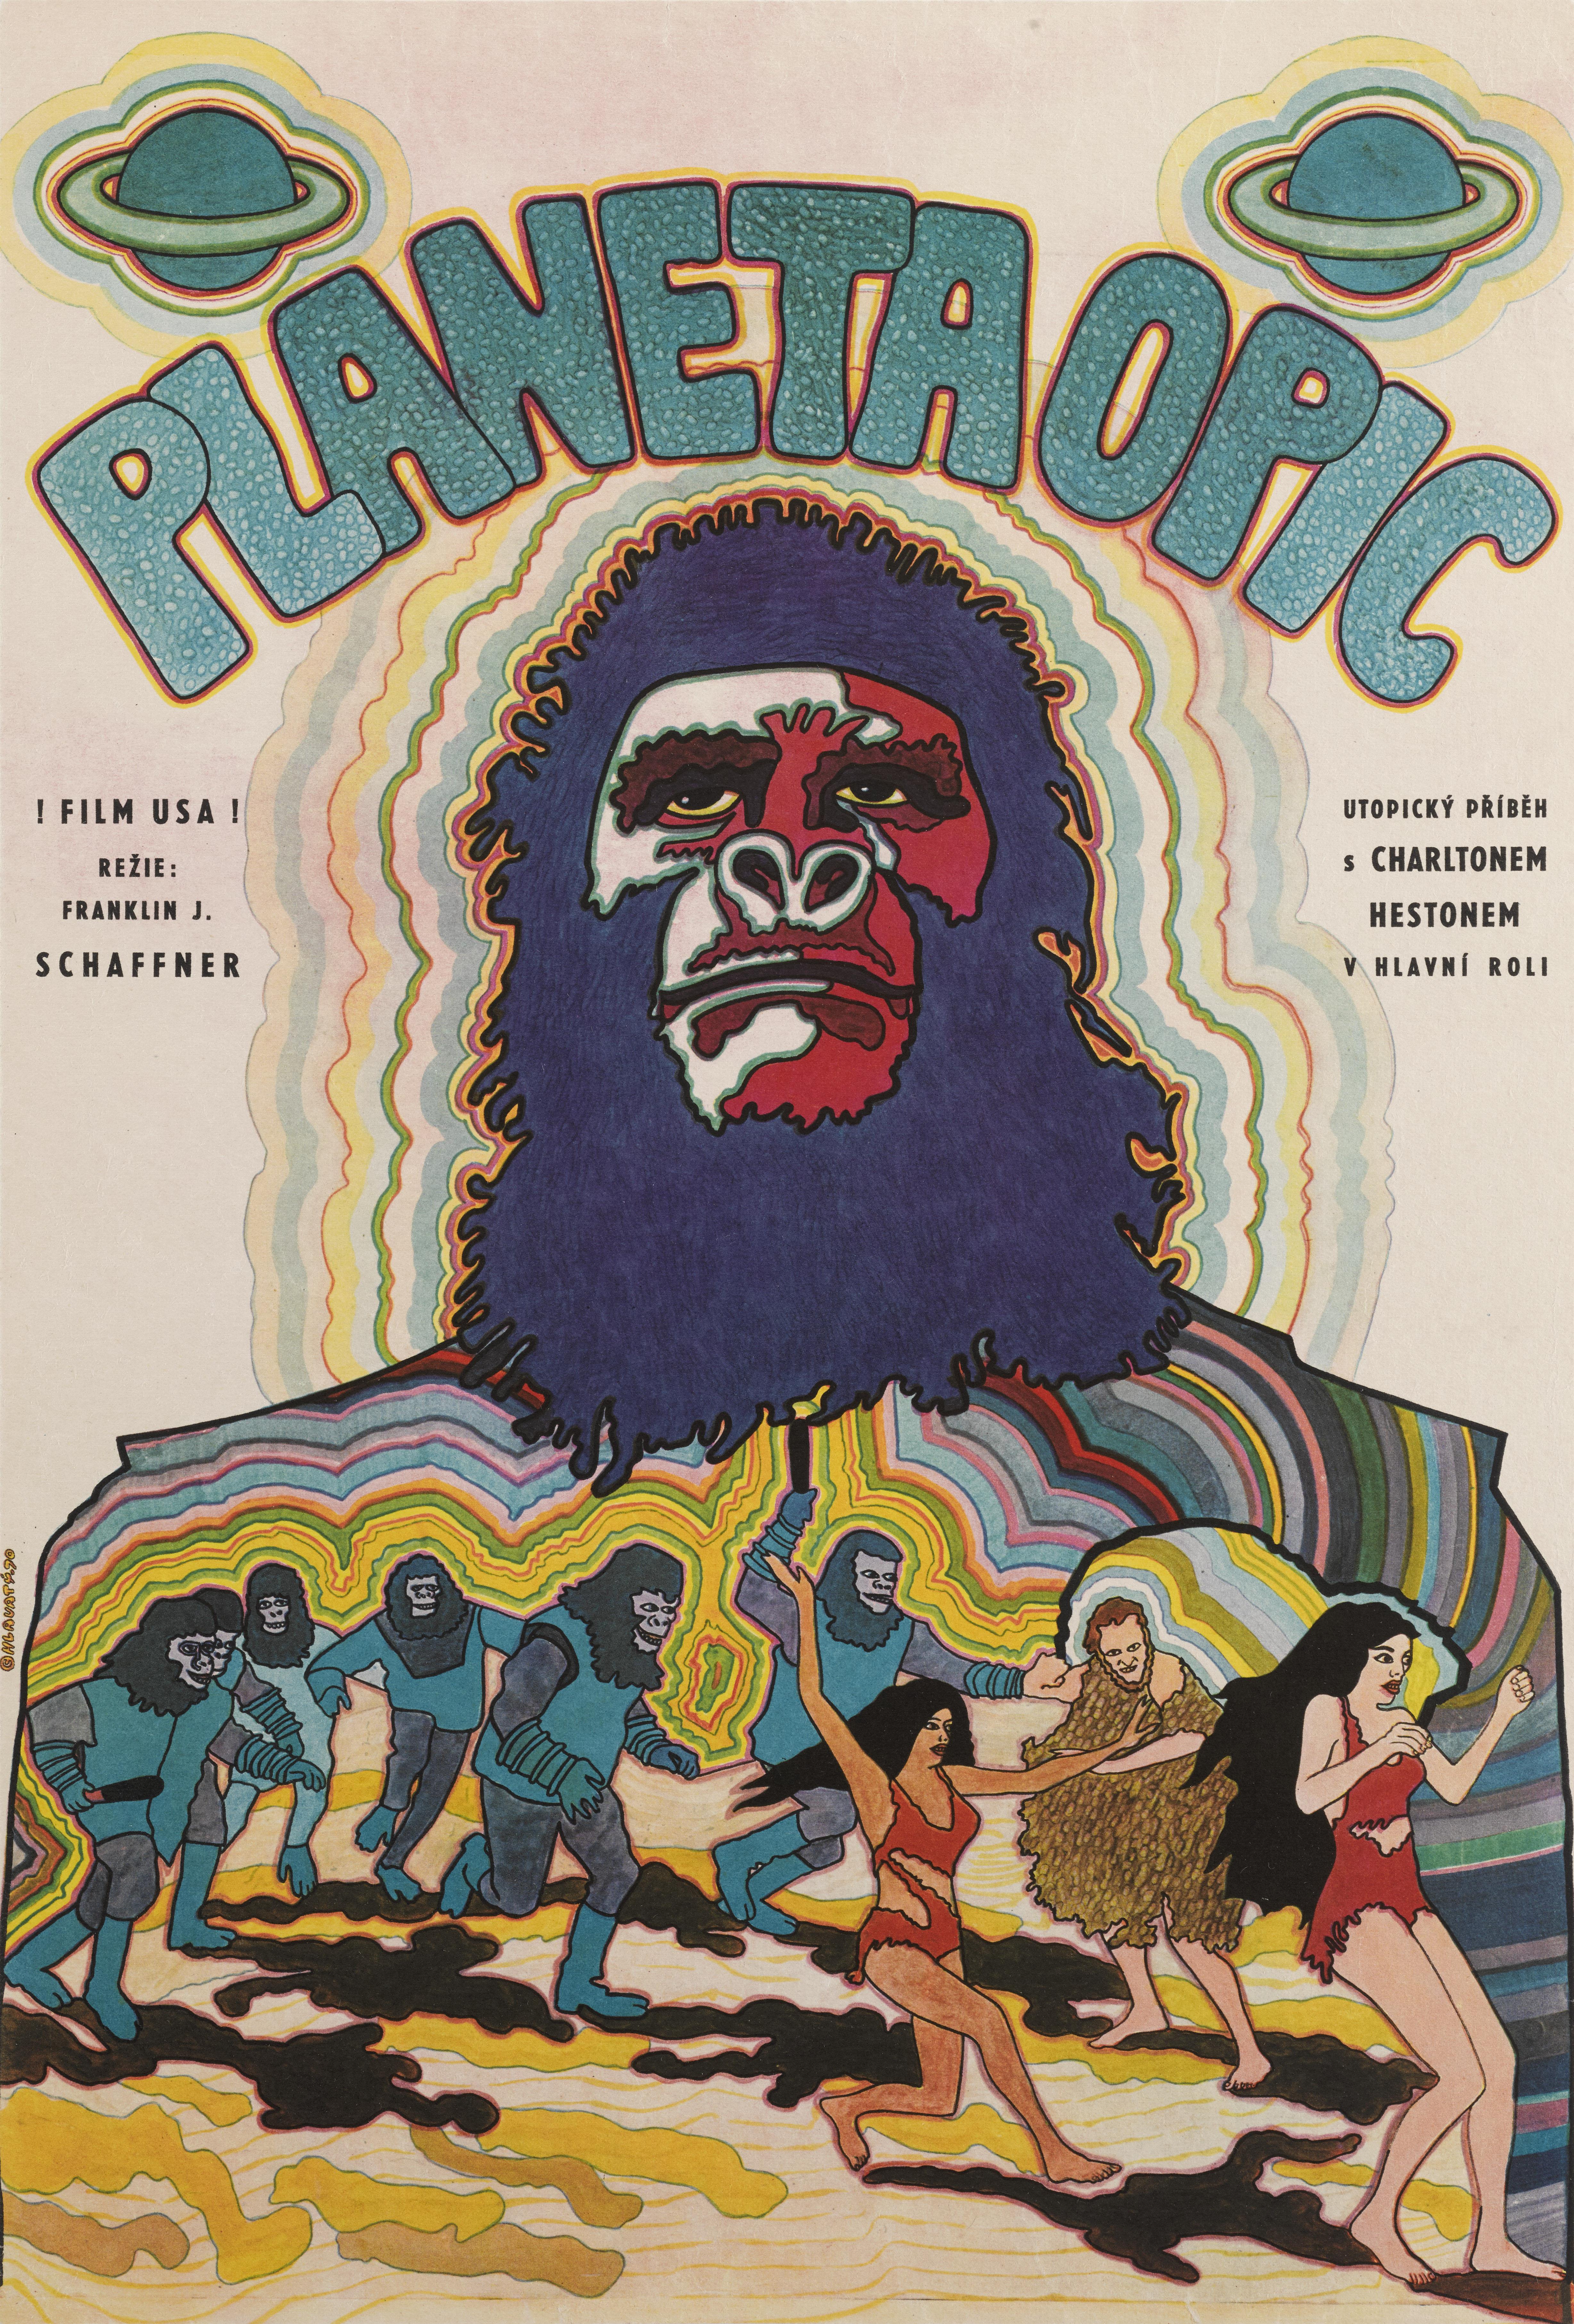 70s planet of the apes